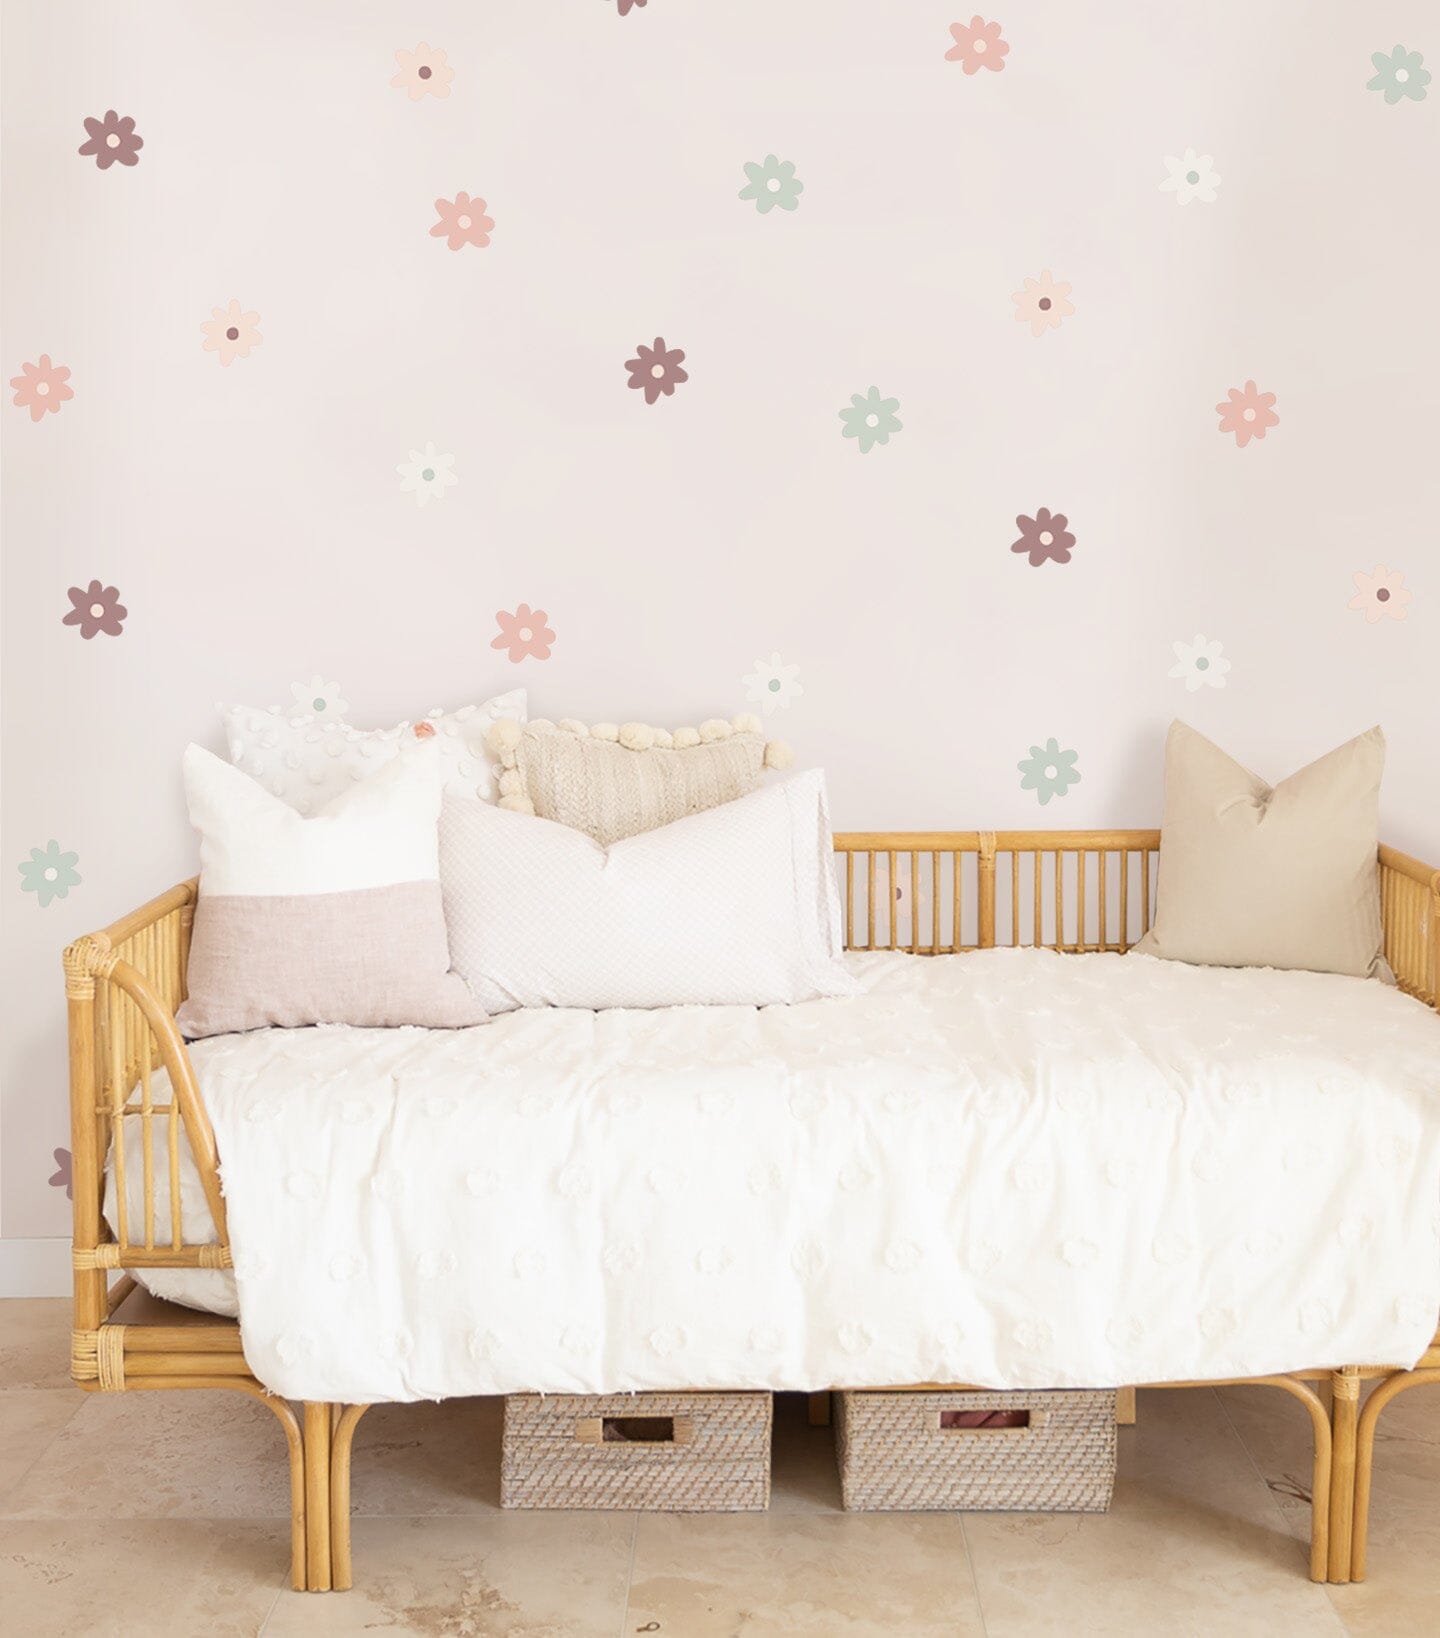 Daisy Doodle Floral Wall Sticker / Decal - World of Wall Stickers